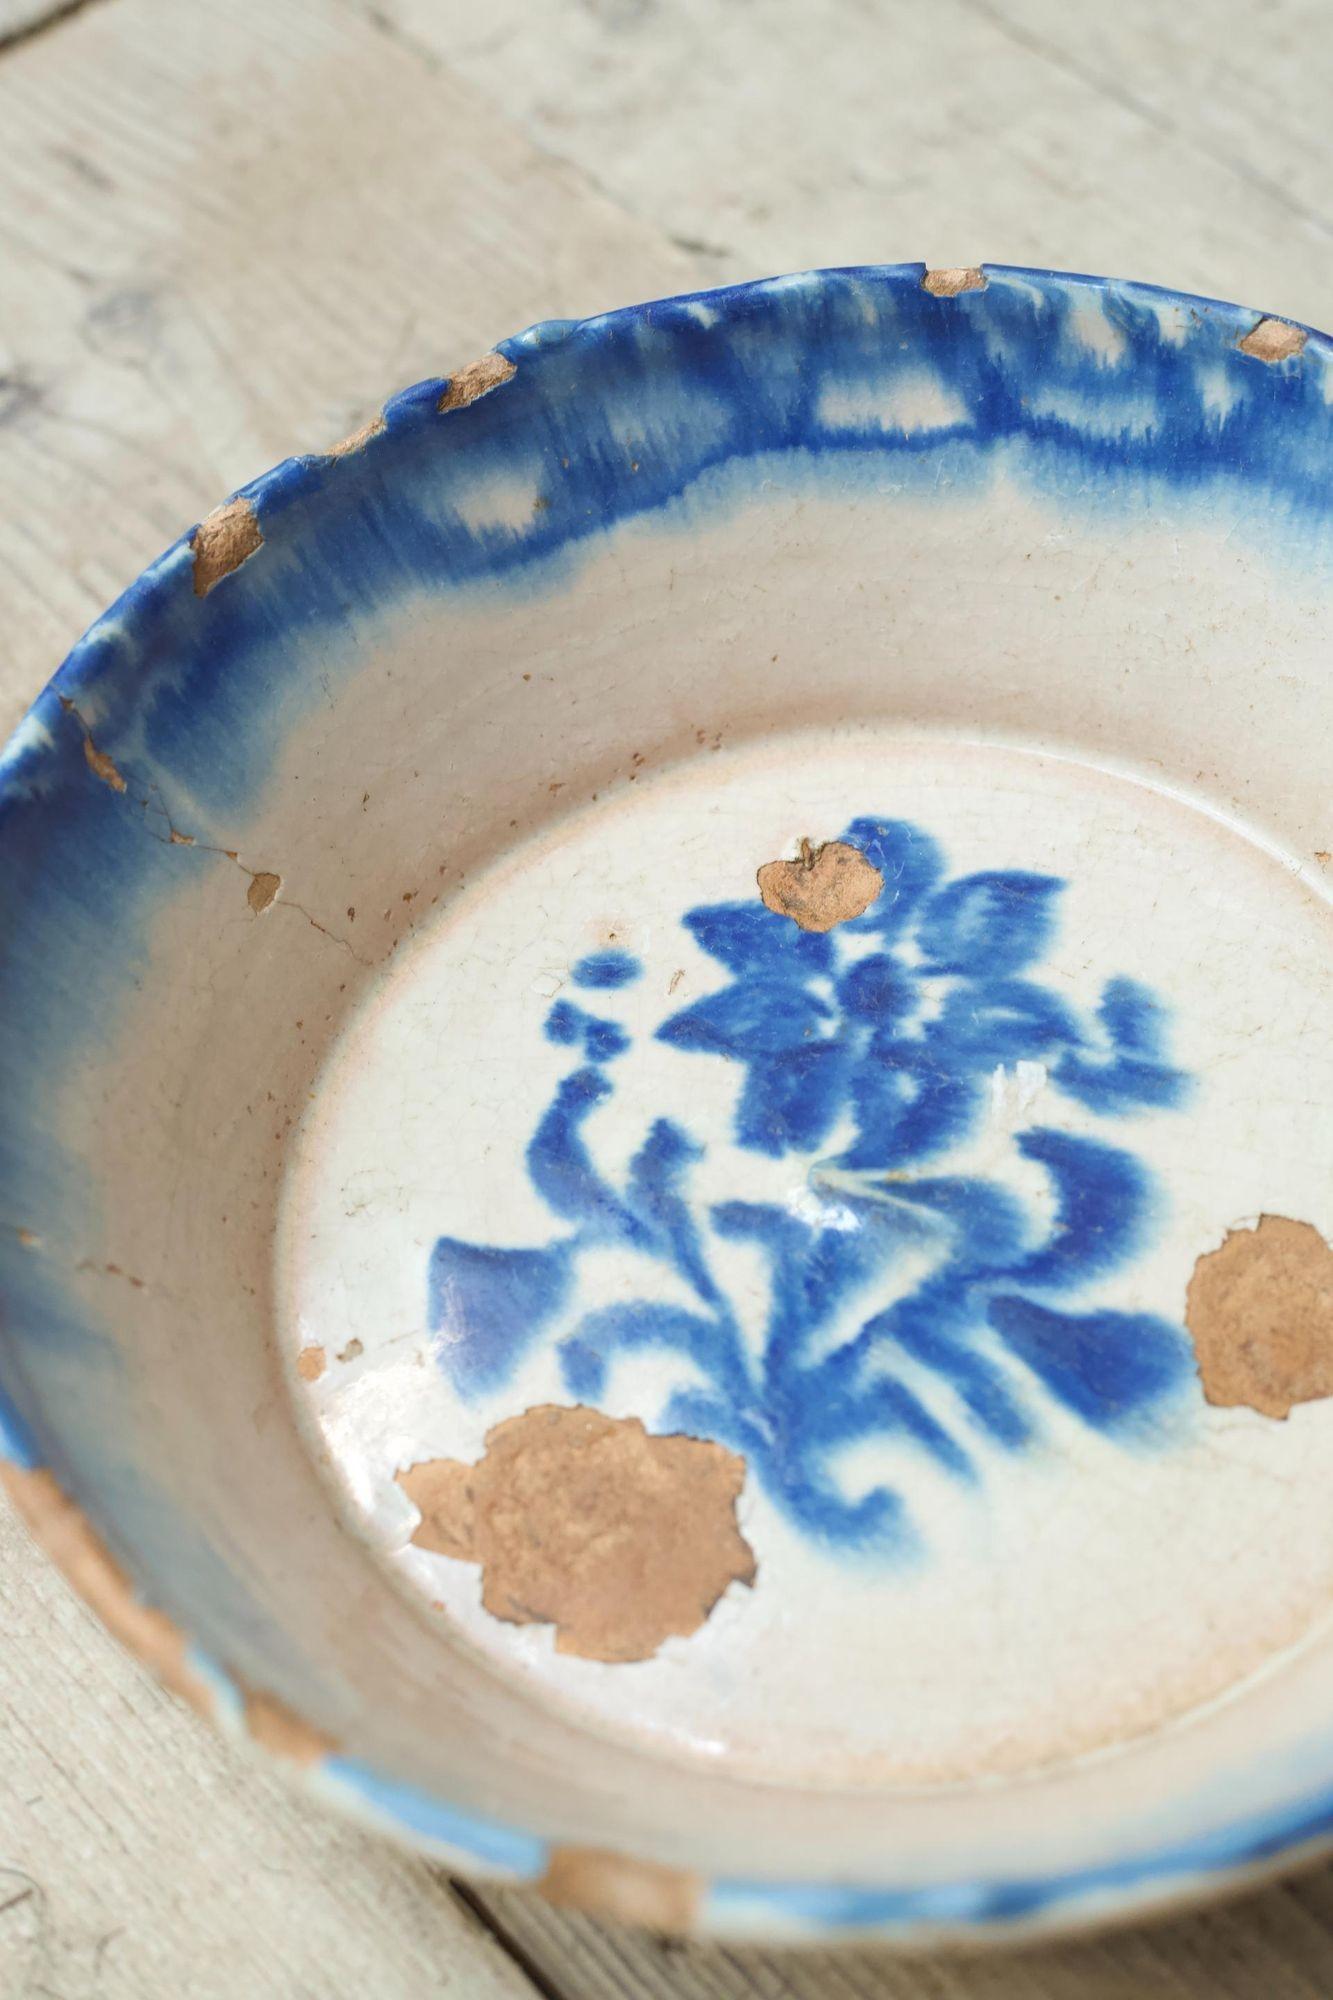 I have been lucky enough to find a great collection of these stunning 18th century blue and white Spanish bowls. Decorated with floral and abstract decoration making them hugely decorative. All have minor issues with their condition but to me things